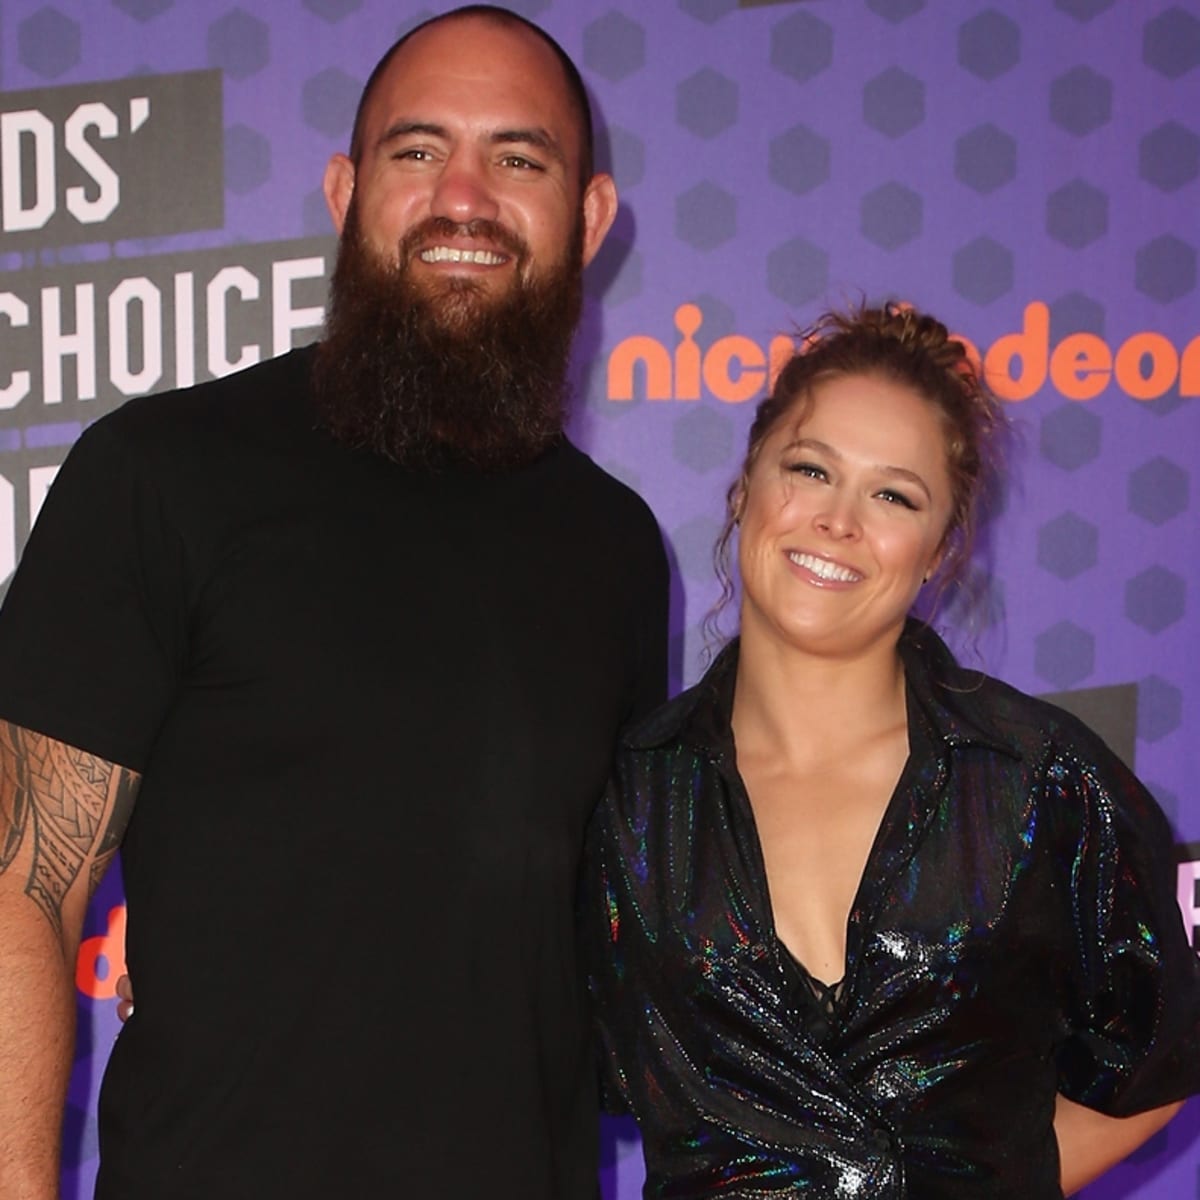 ronda rousey's husband travis browne, Who is Ronda Rousey's husband